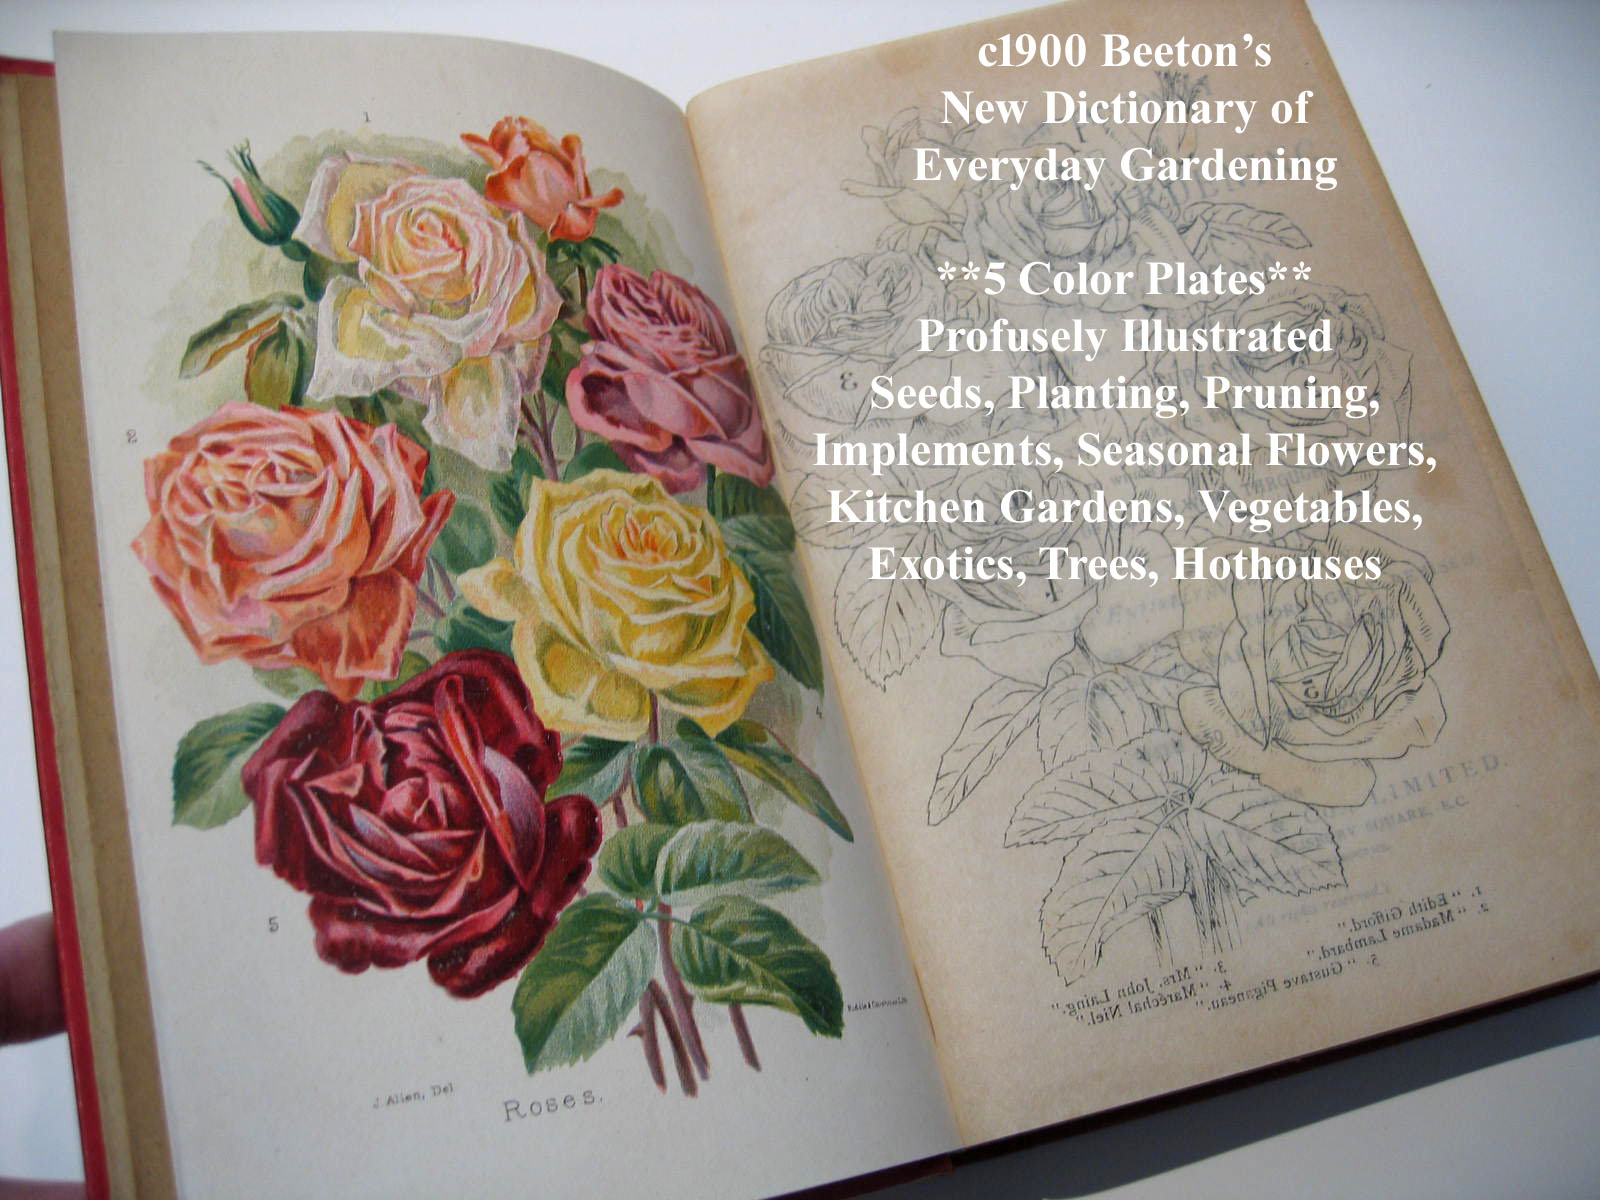 Beetons dictionary of every day gardening antique book 1